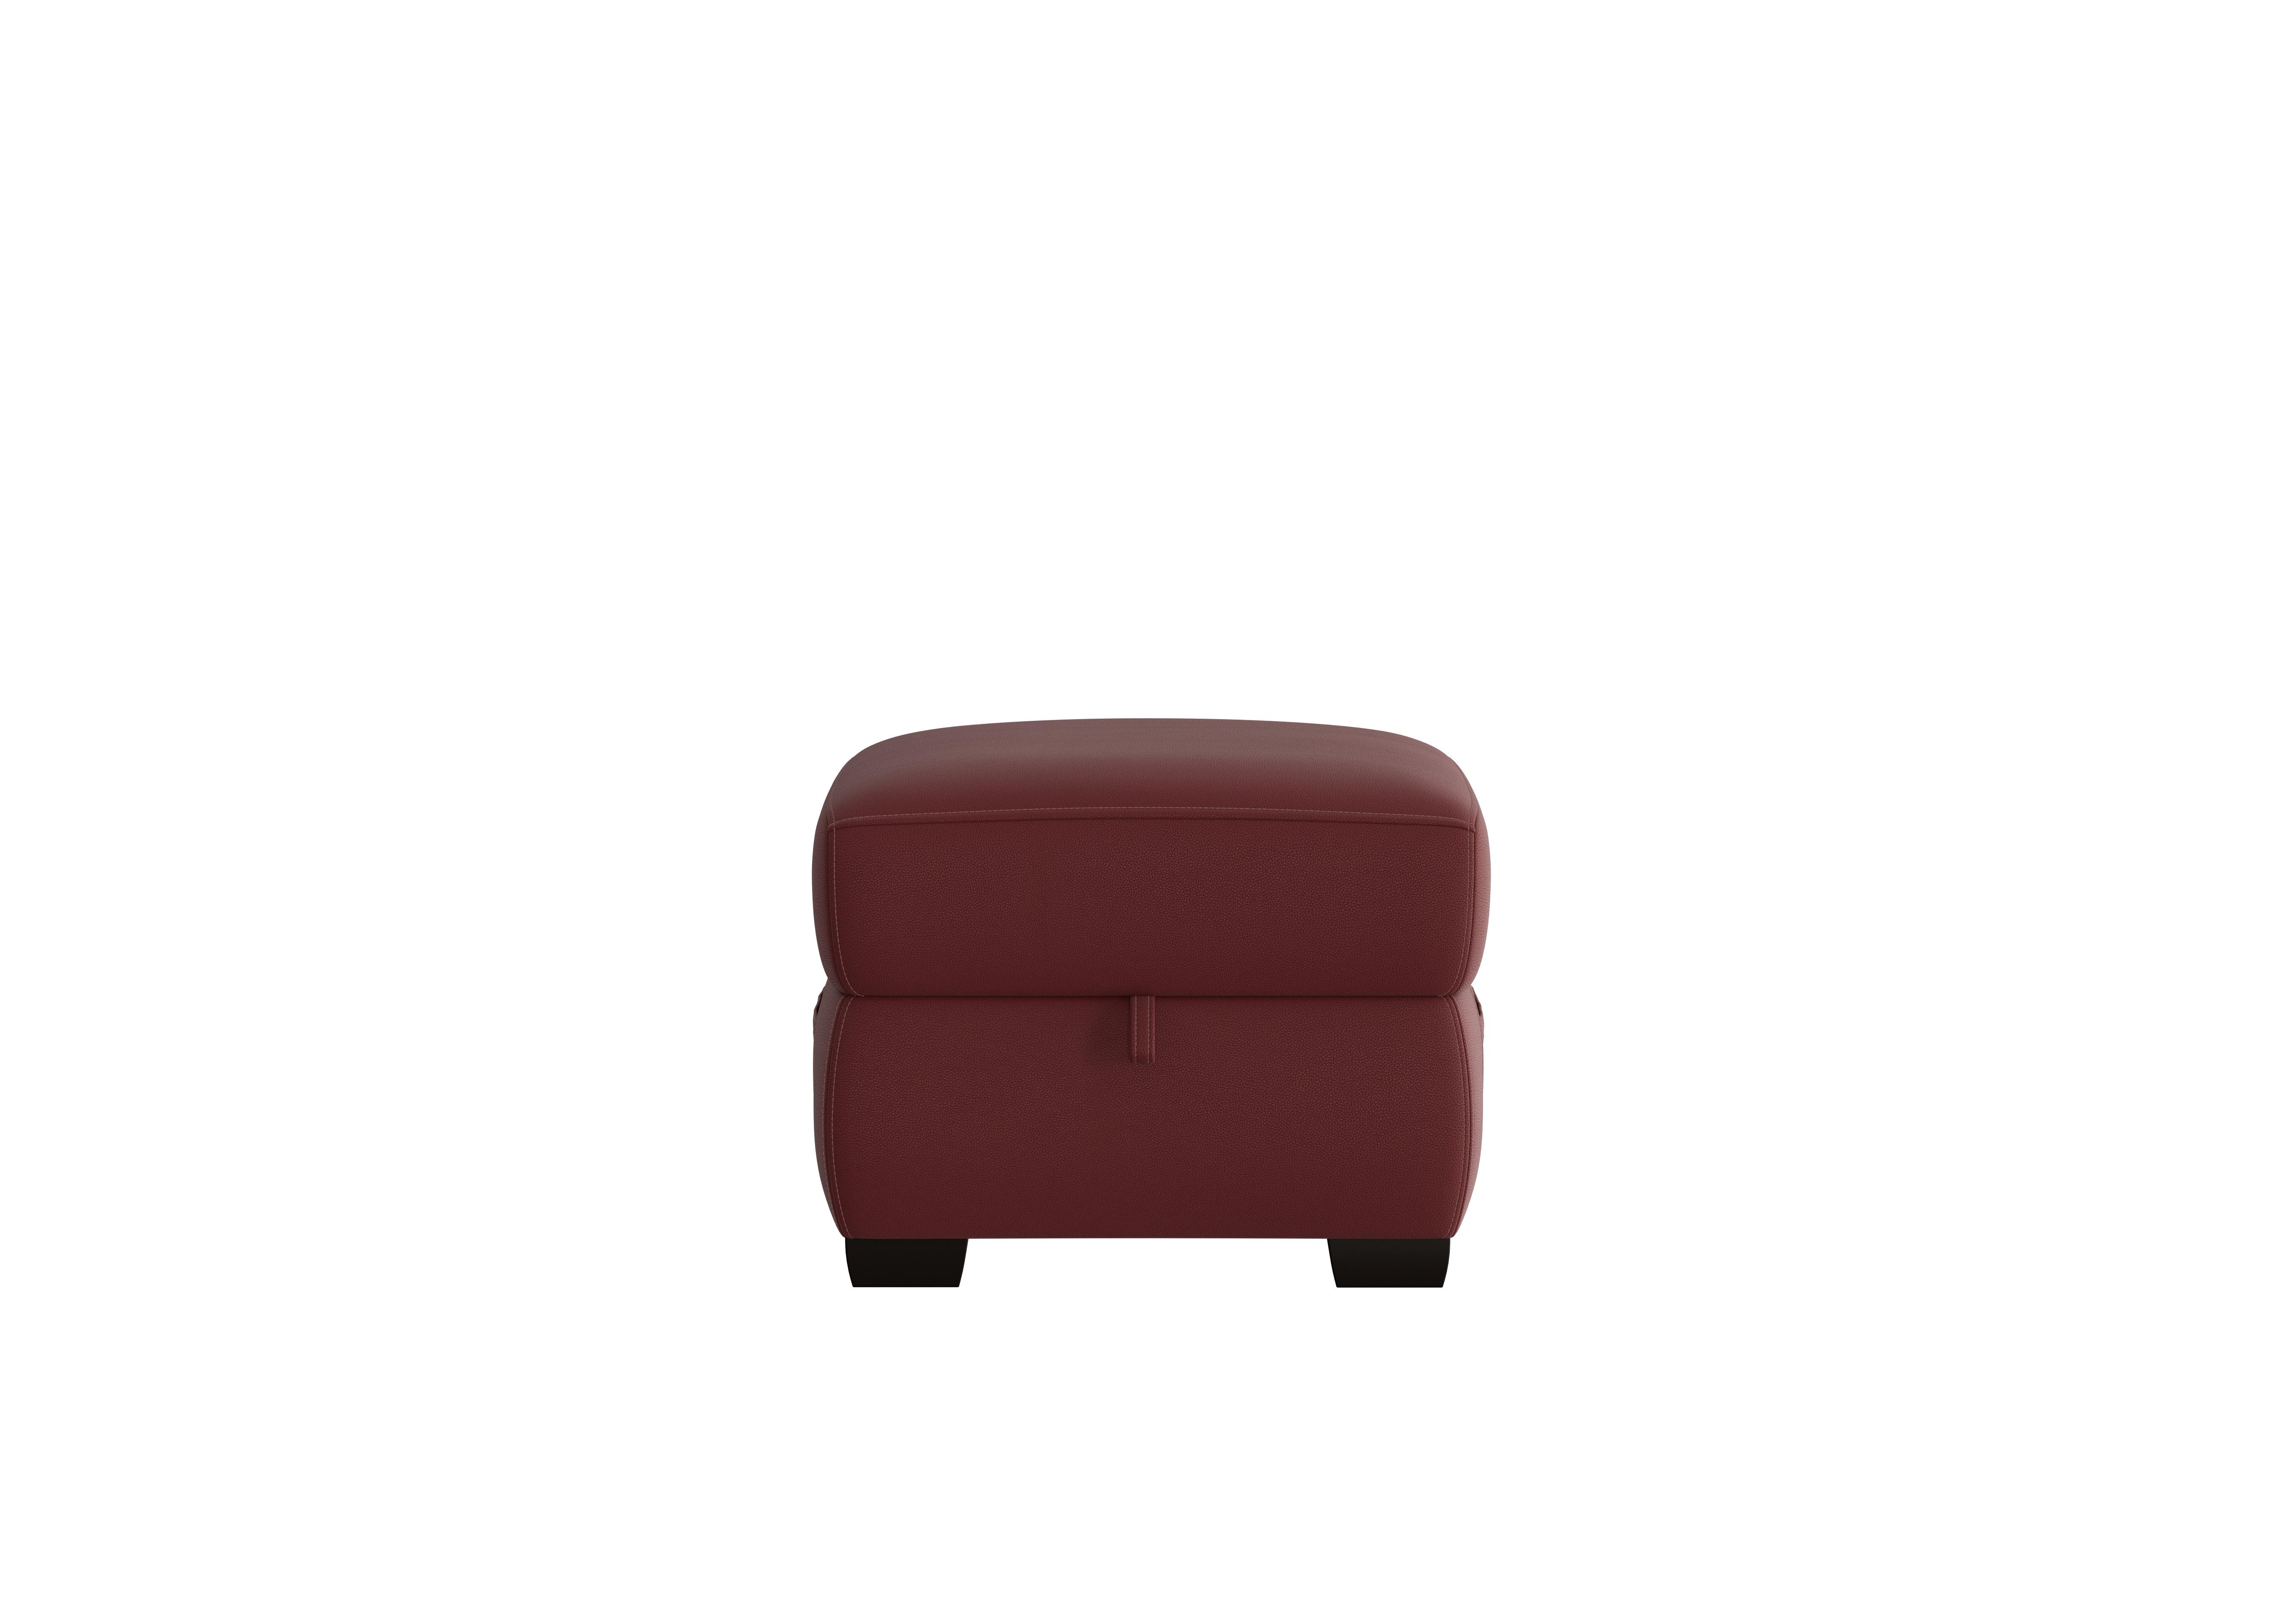 Starlight Express Leather Storage Footstool in Bv-035c Deep Red on Furniture Village